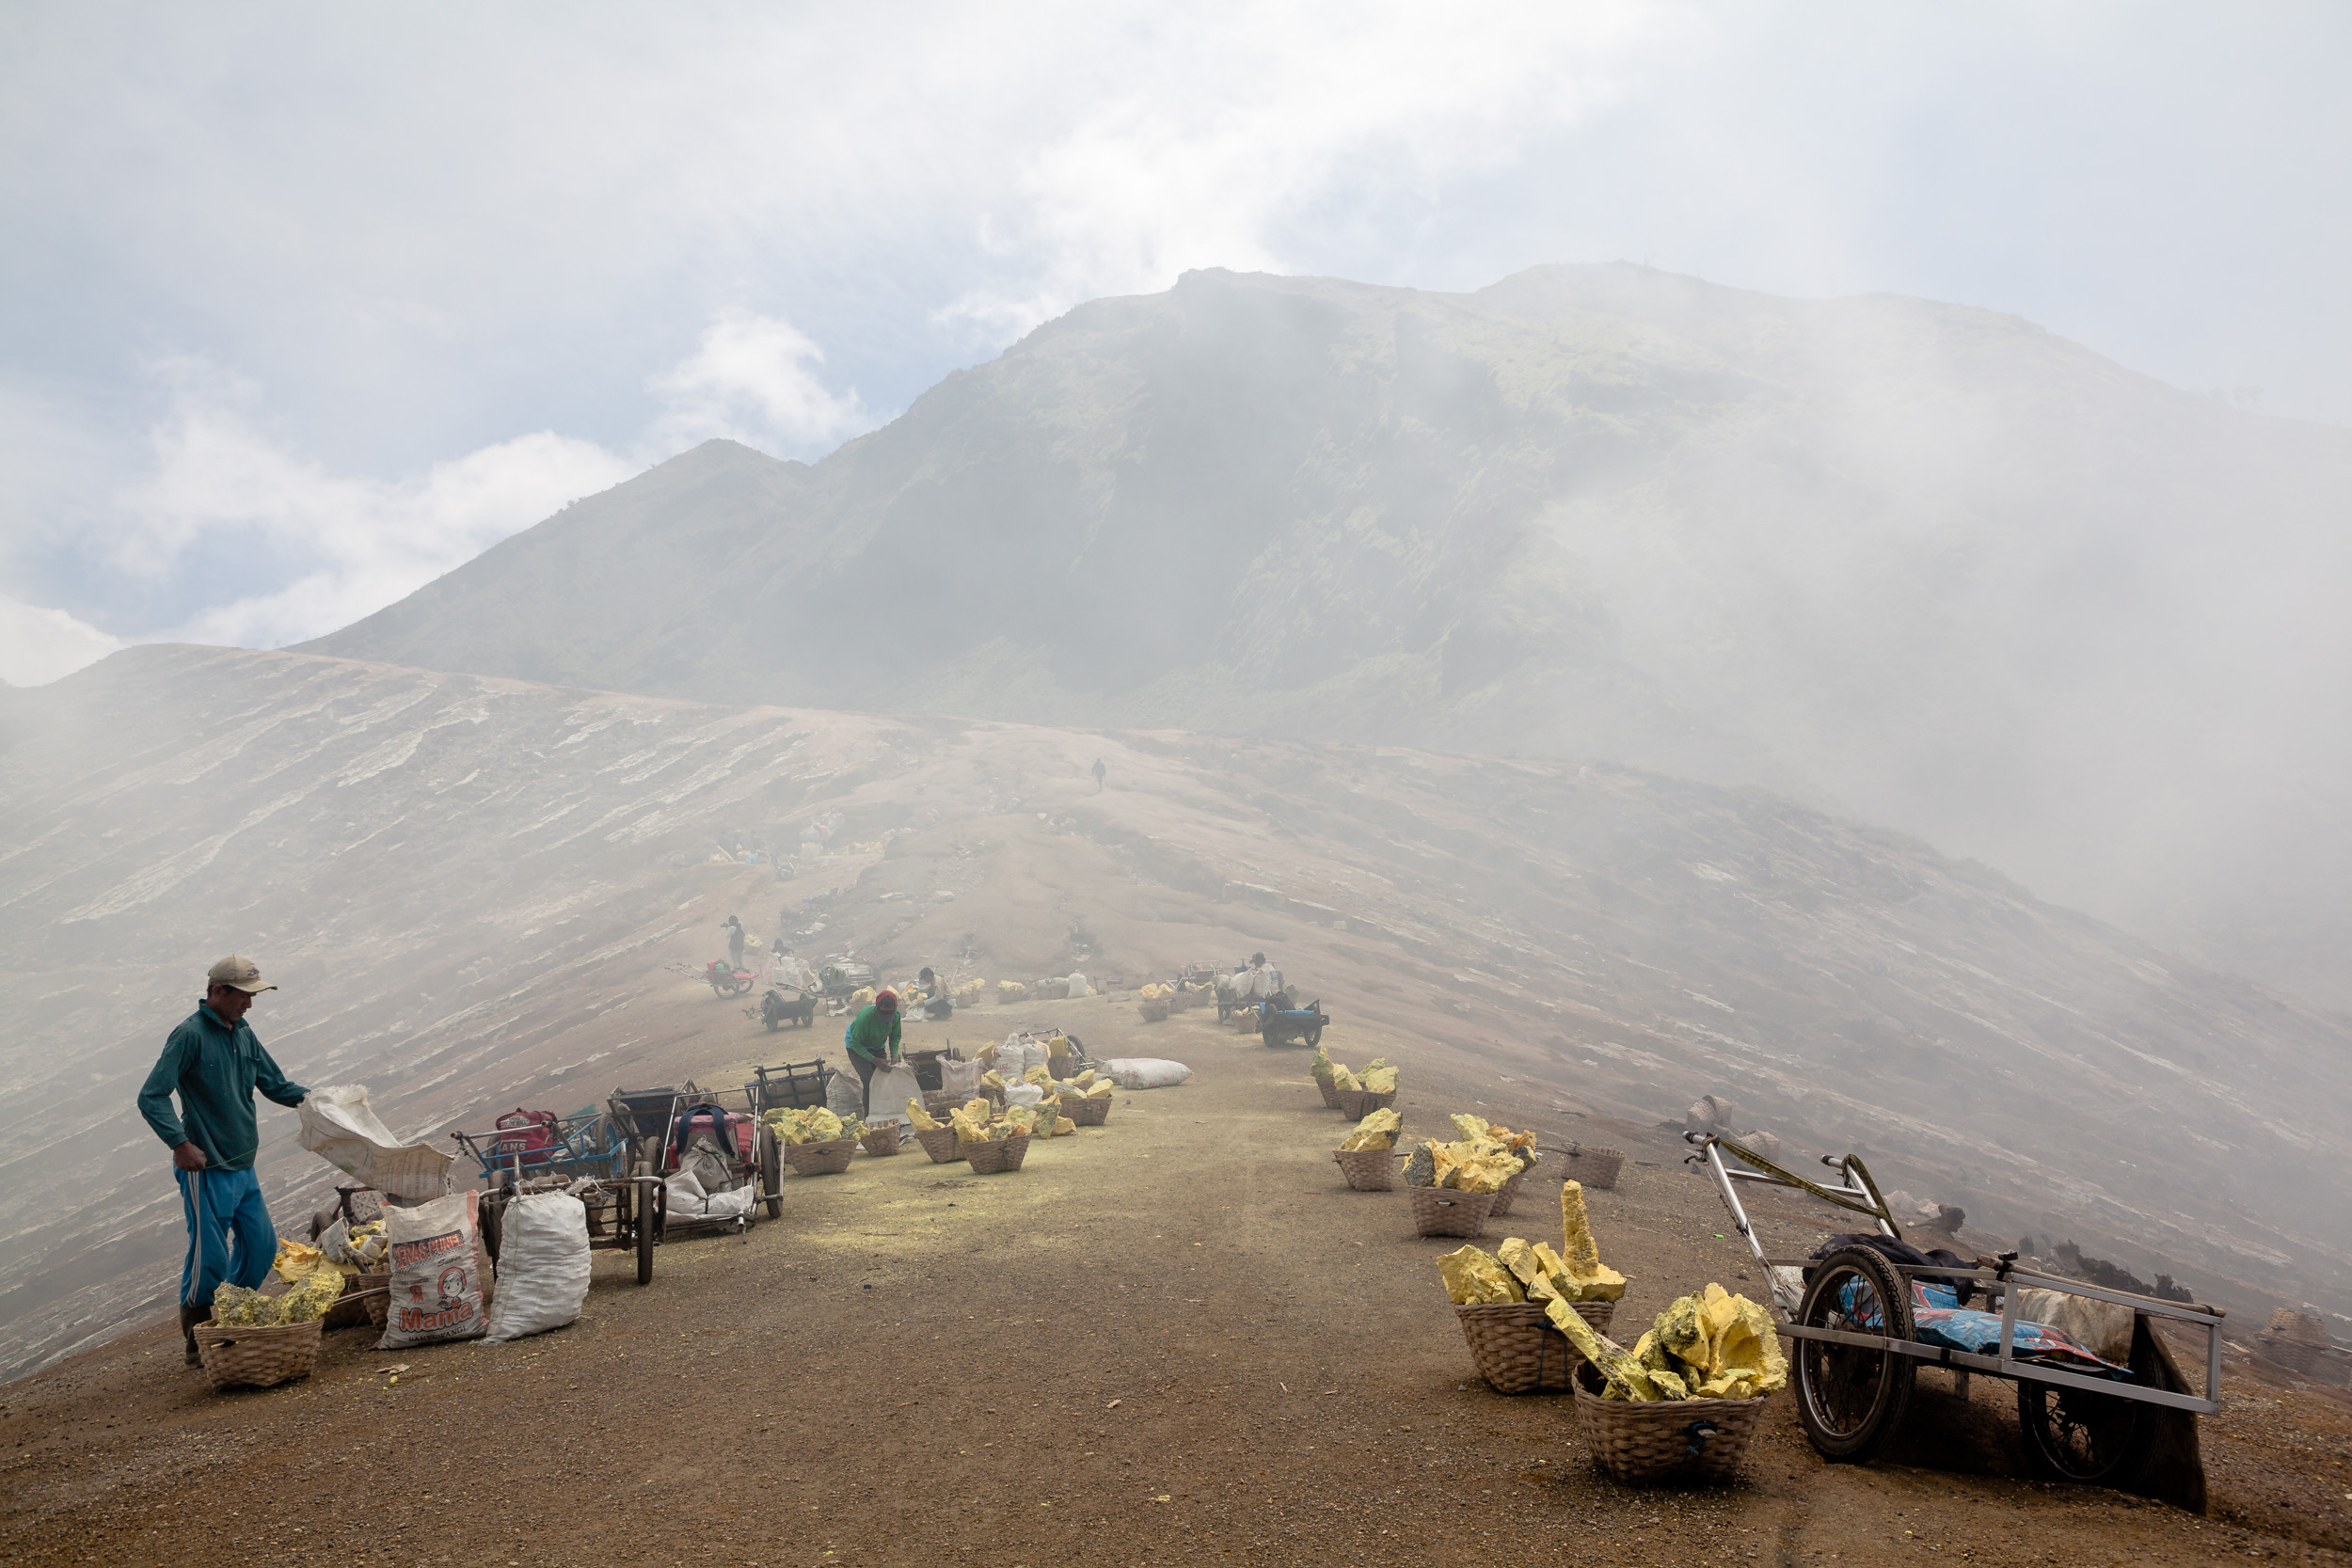 The peak of Kawah Ijen. This is where the miners’ sufferance ends – temporarily –. From here, the loads of sulfur are carried down the slope on two wheels hand carts. The miners do the exhausting trip twice per day, for a ridiculous amount of money.